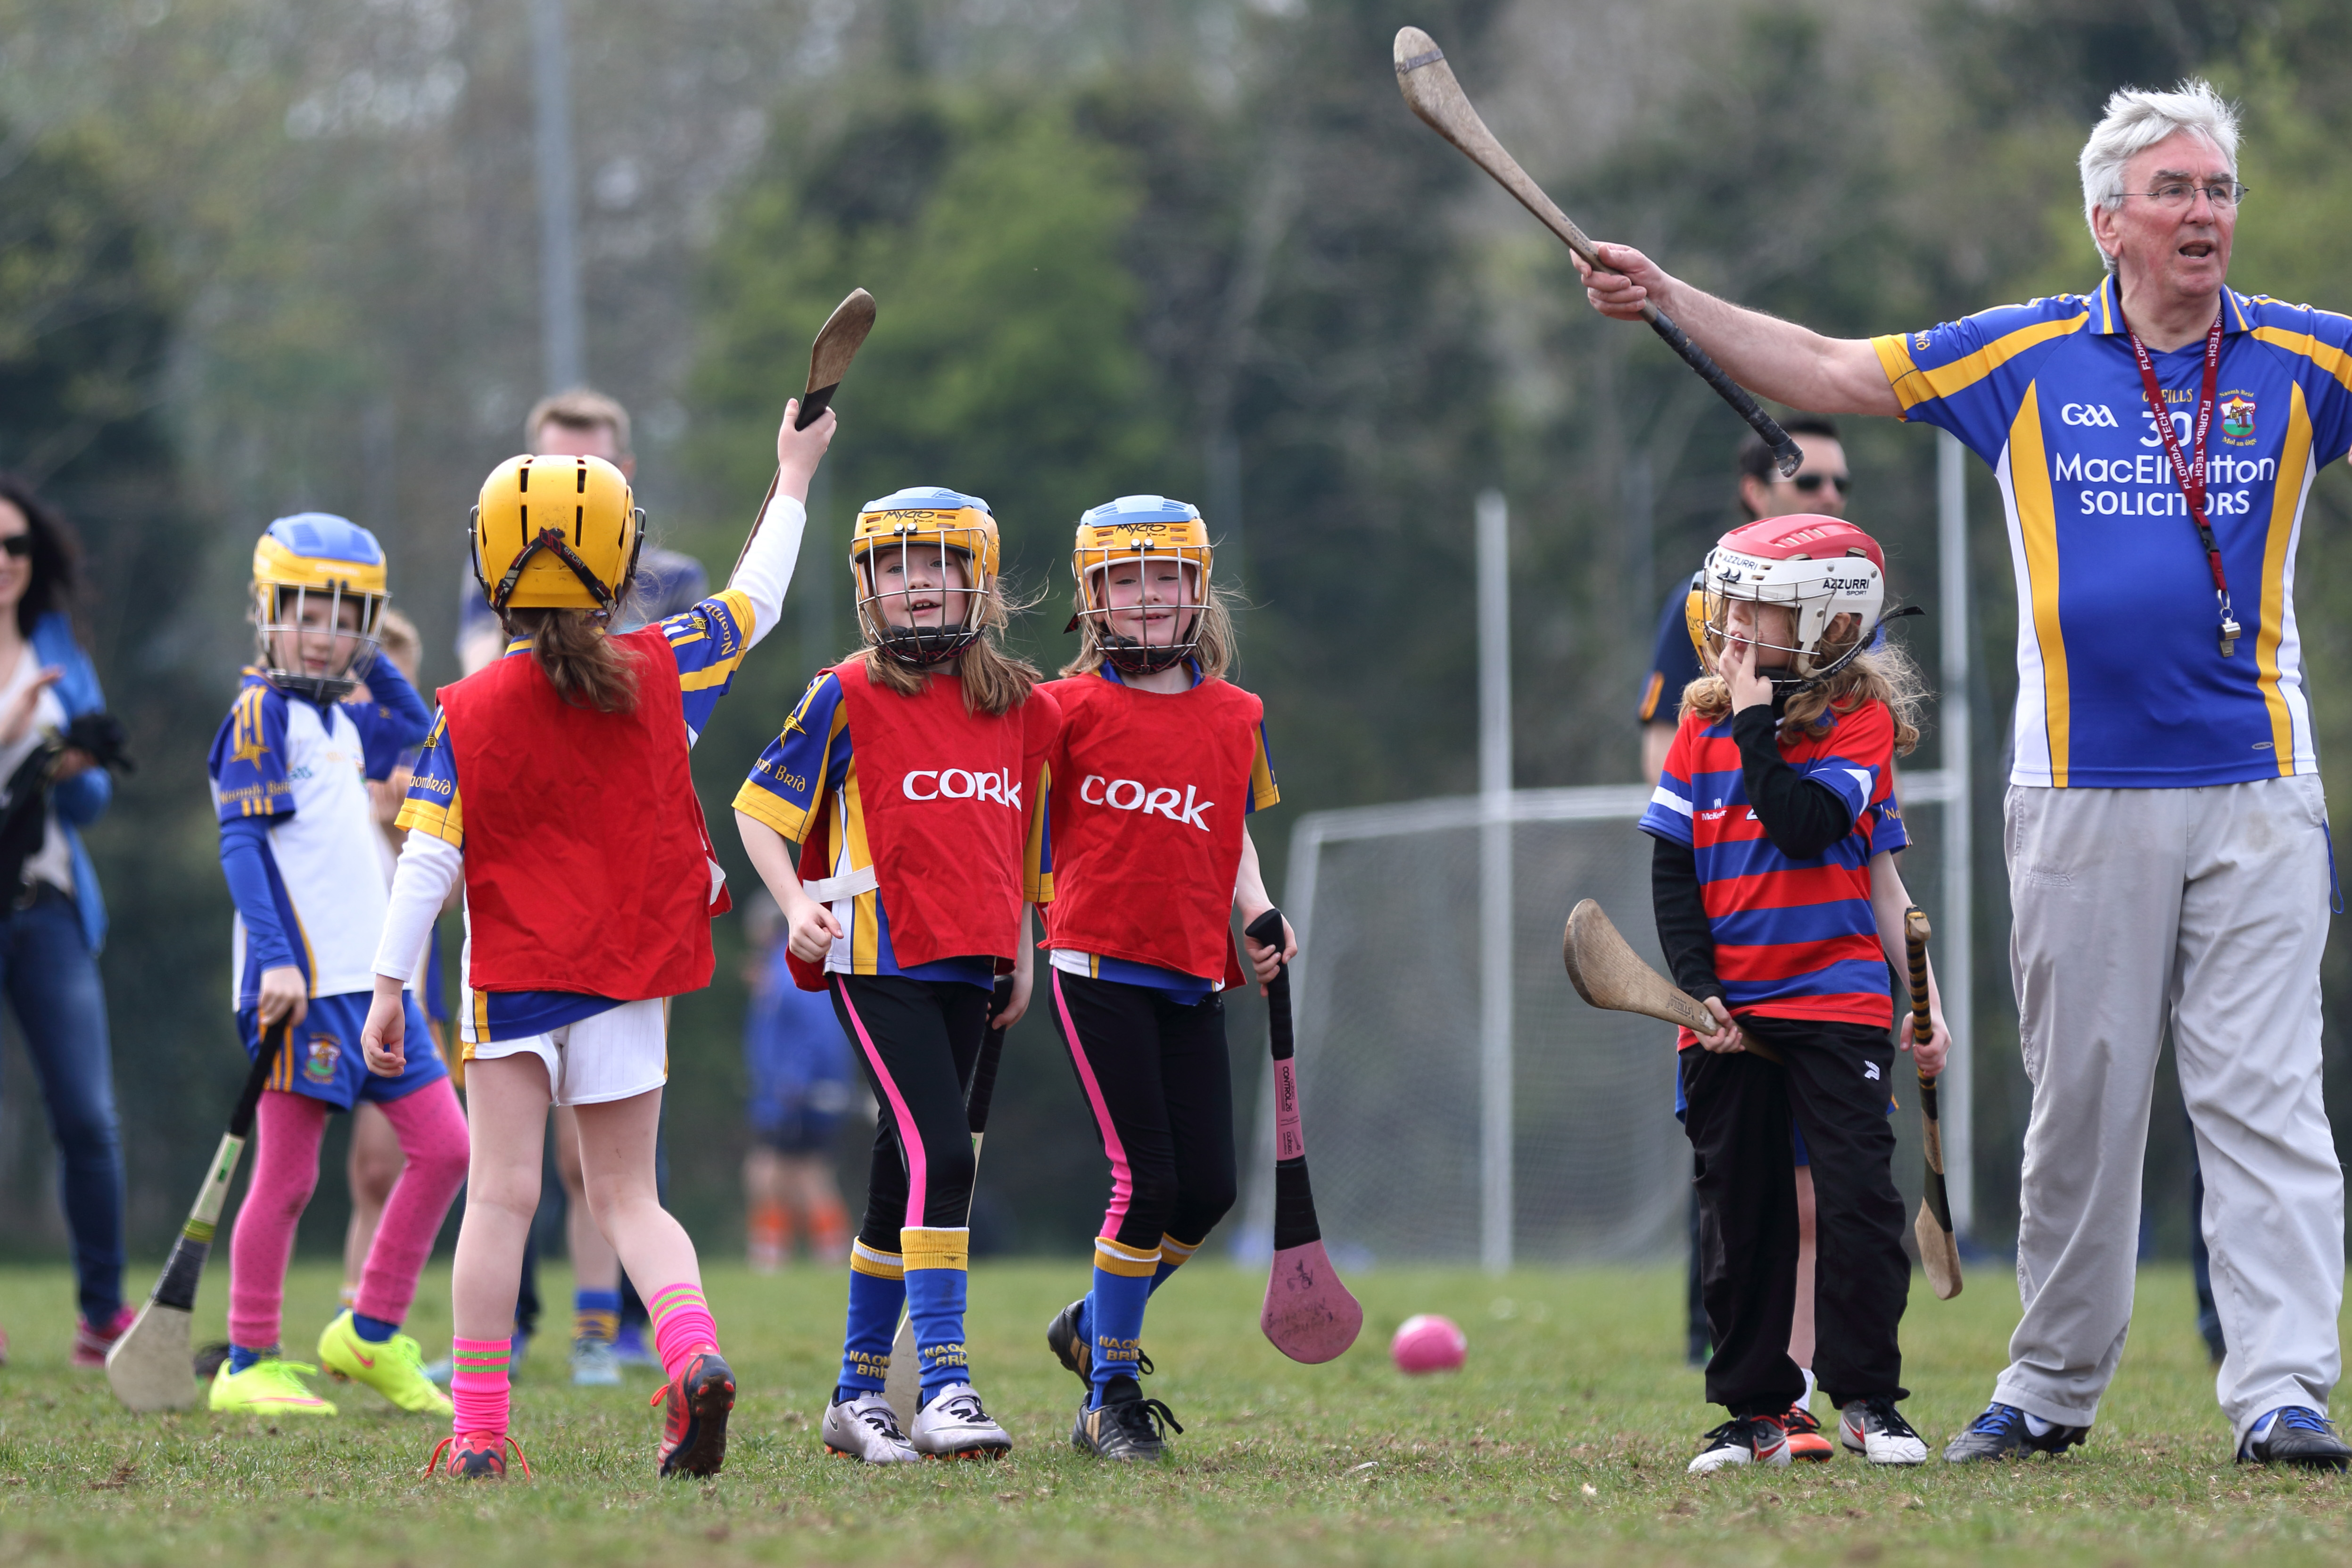 Coaches: Extensive Online Resources Available On Ulster Council Site